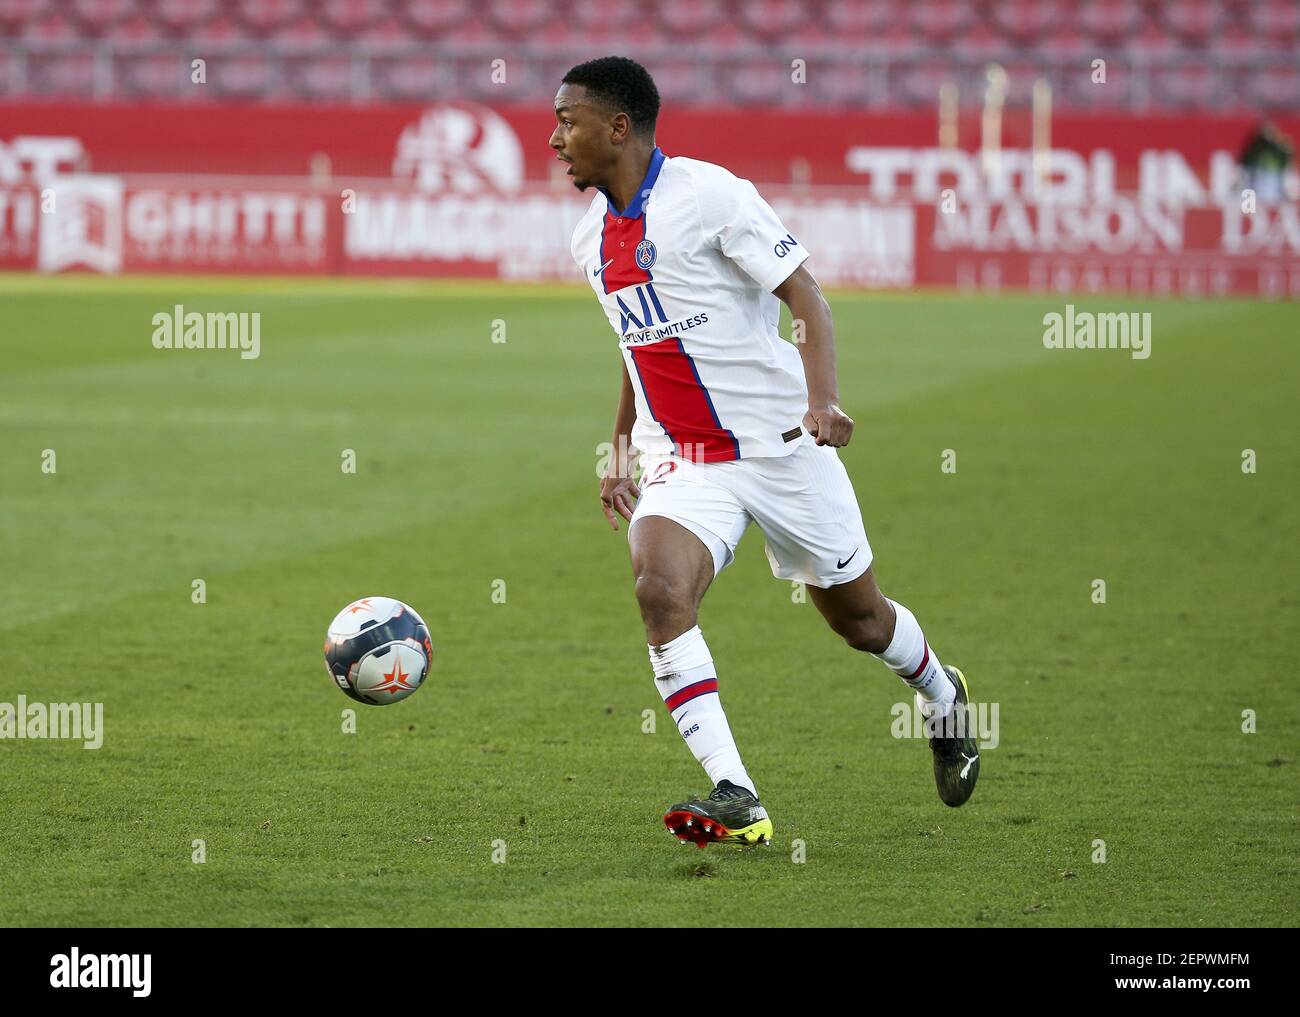 Abdou Diallo of PSG during the French championship Ligue 1 football match  between Dijon FCO (DFCO) and Paris Saint-Germain (PSG) on February 27, 2021  at Stade Gaston Gerard in Dijon, France -